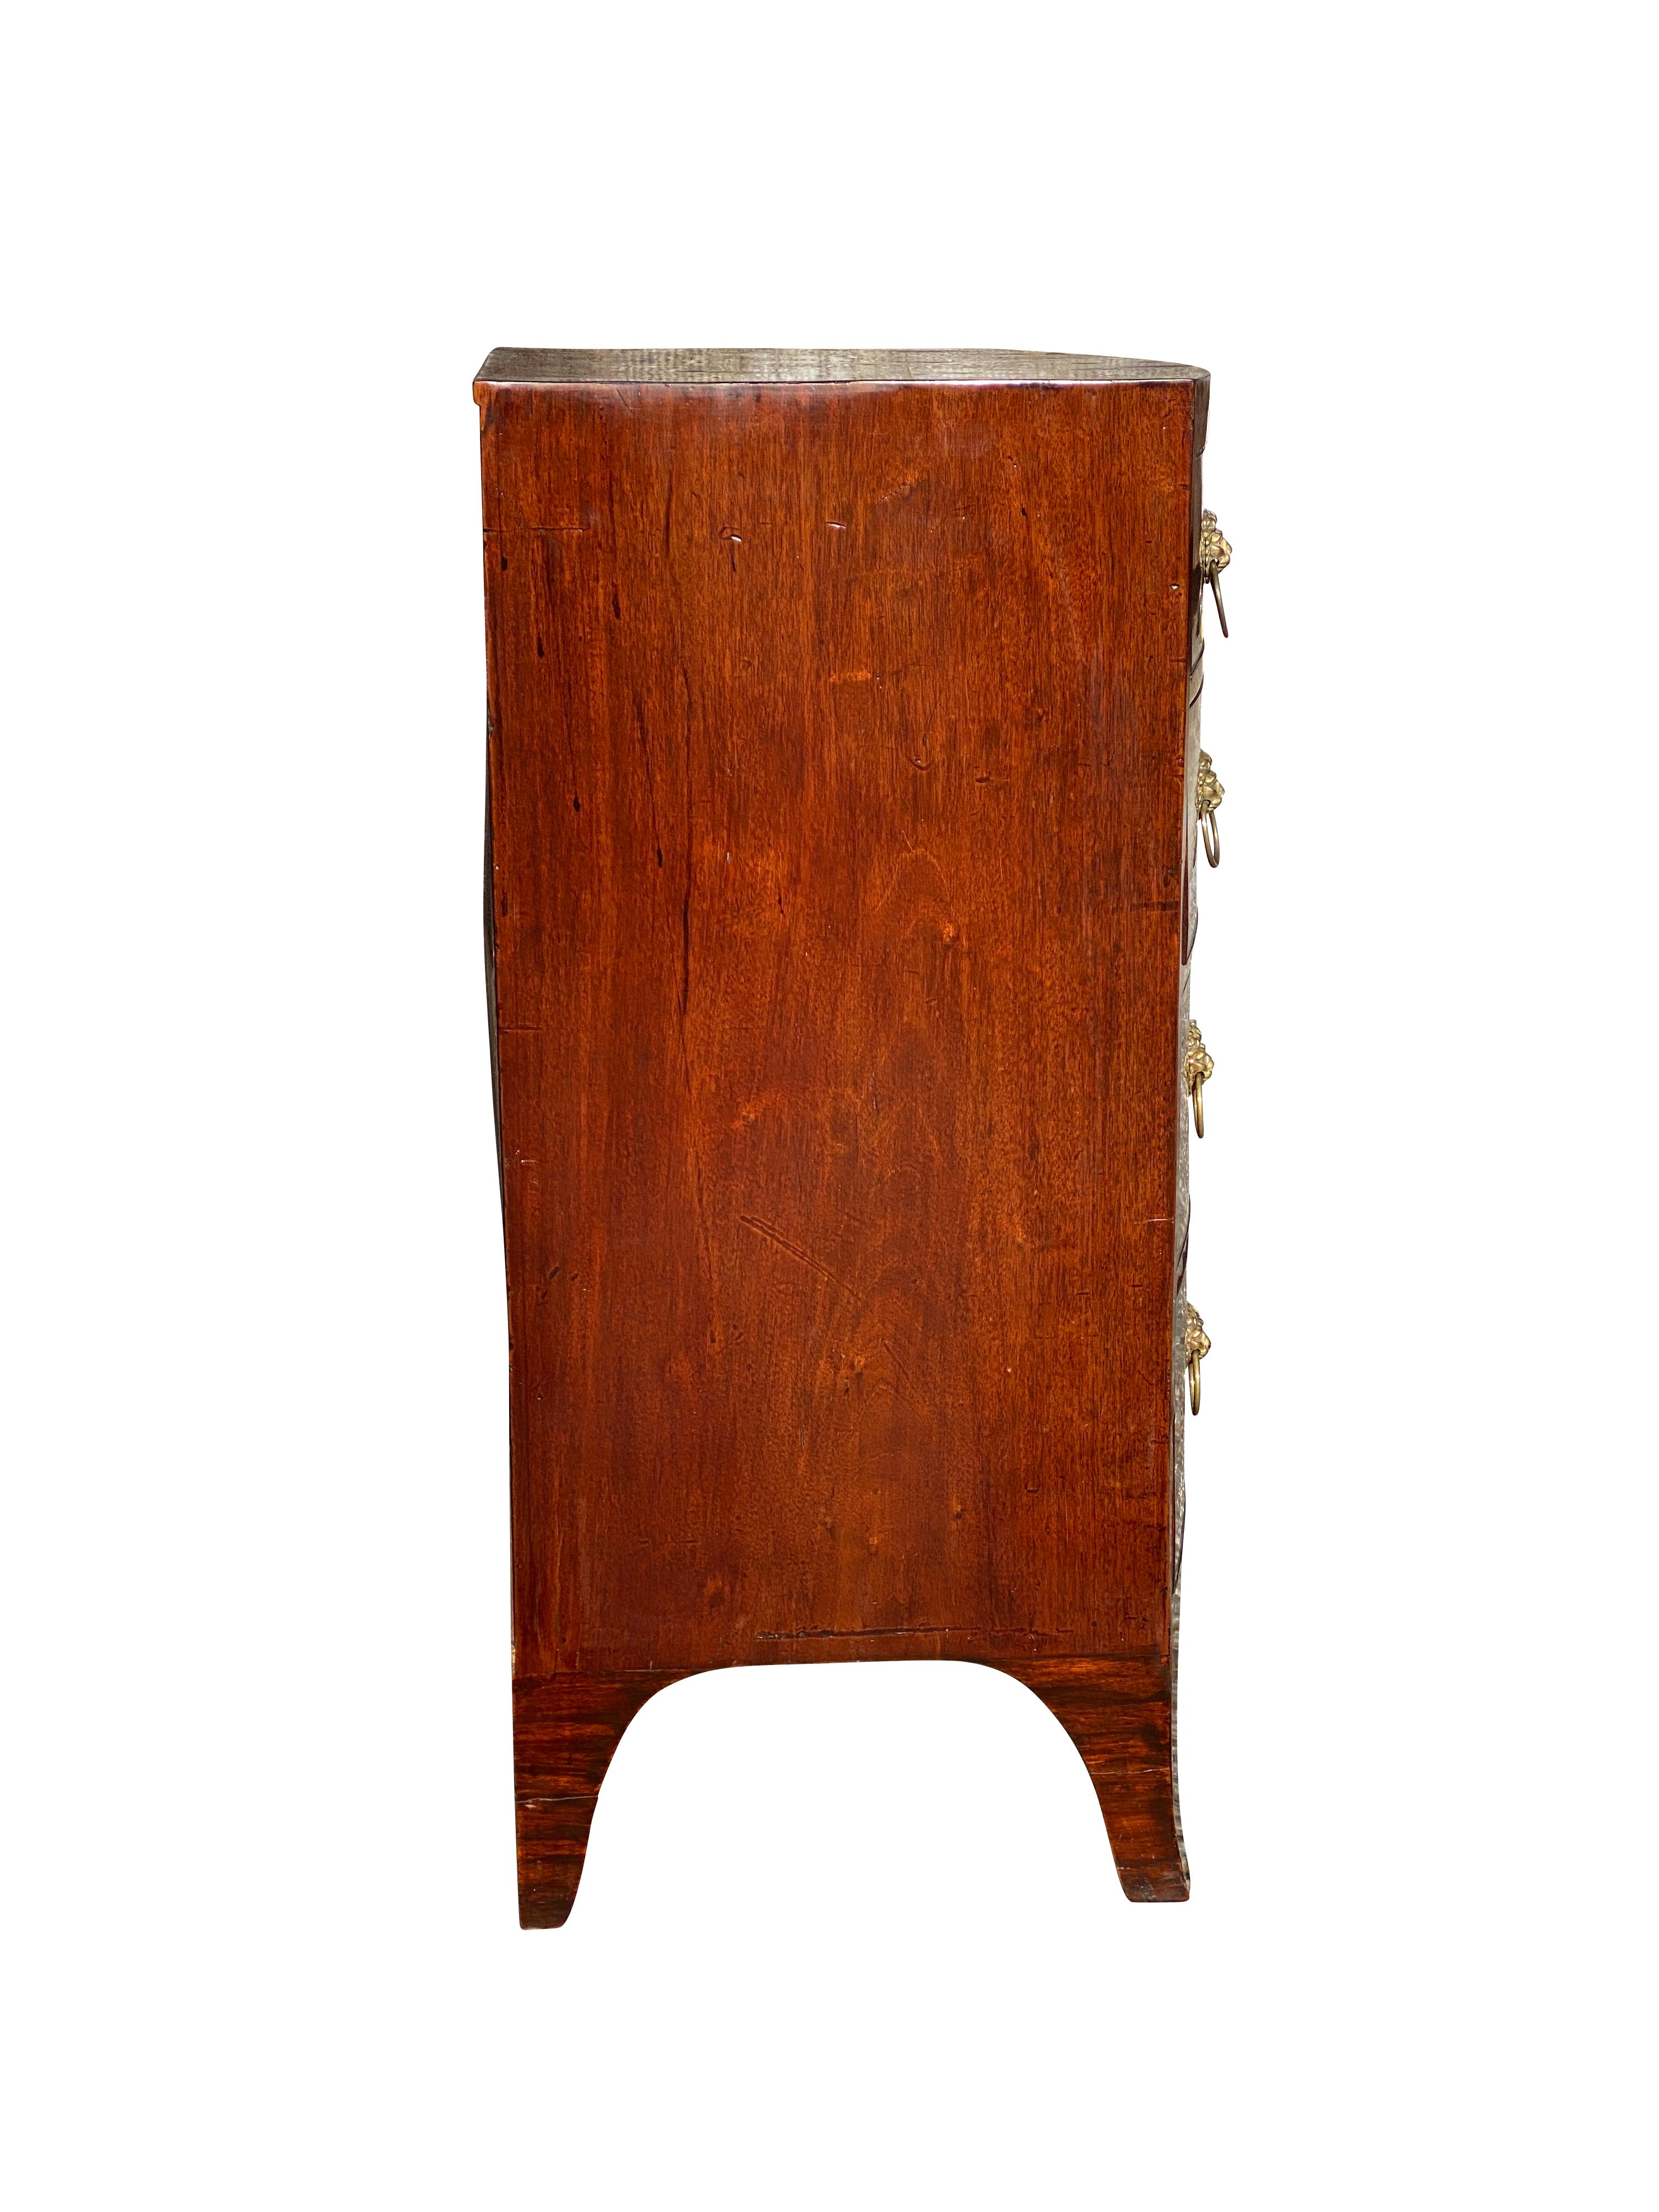 English Regency Mahogany Bow Front Chest of Drawers